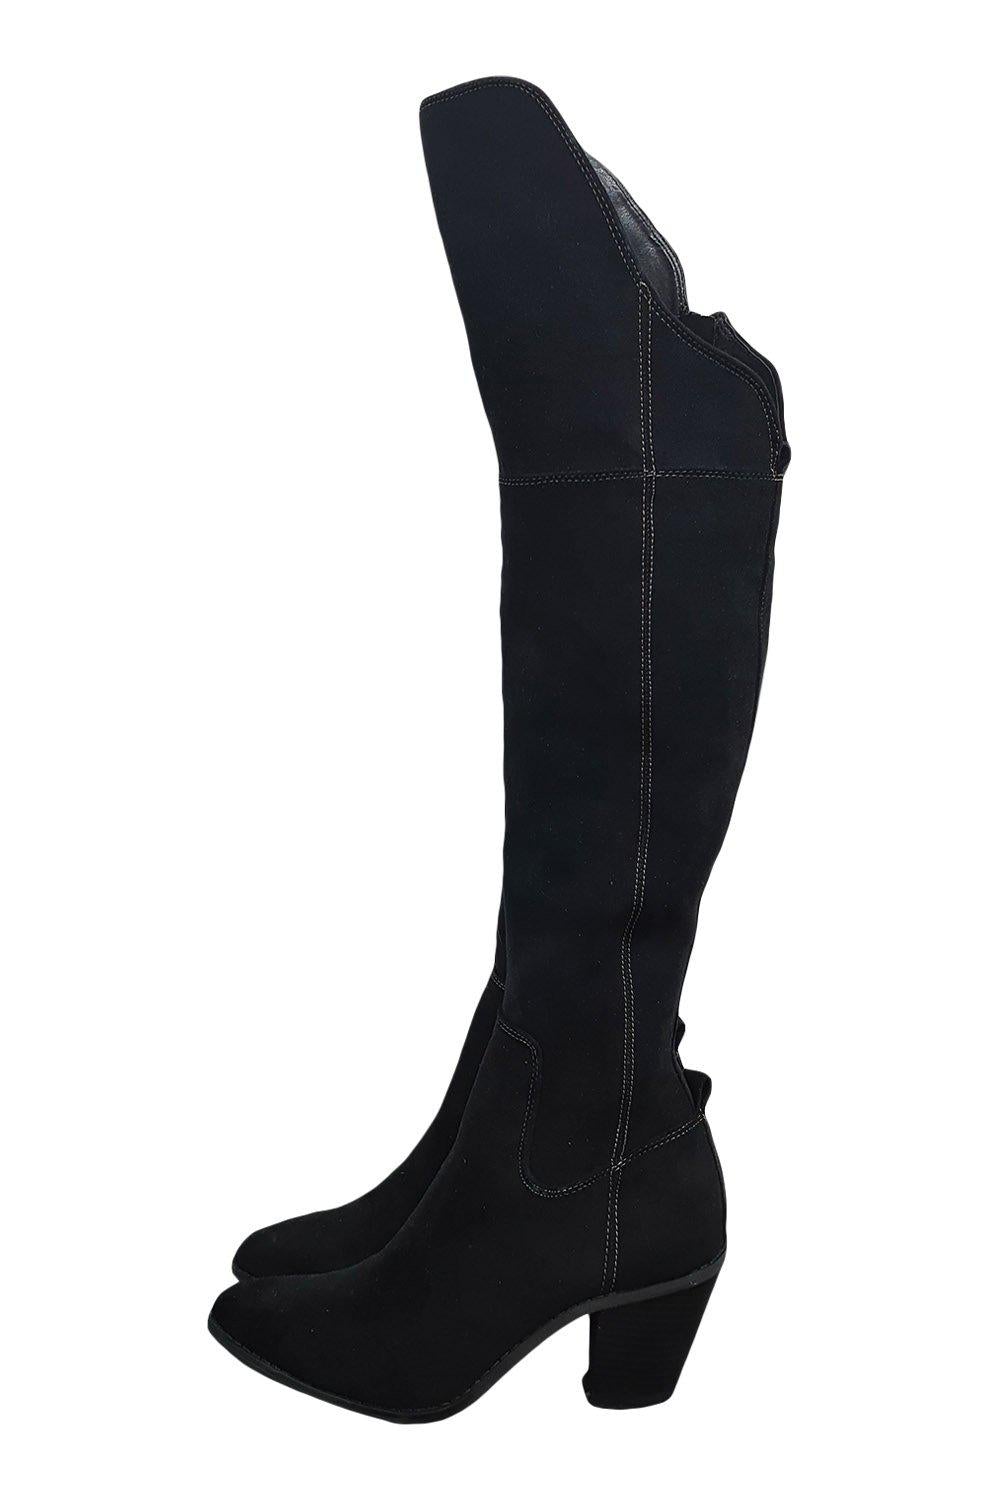 FREE PEOPLE FR X FP Black Suede Over Knee Boots (US 6 | EU 36 | UK 3)-Free People-The Freperie